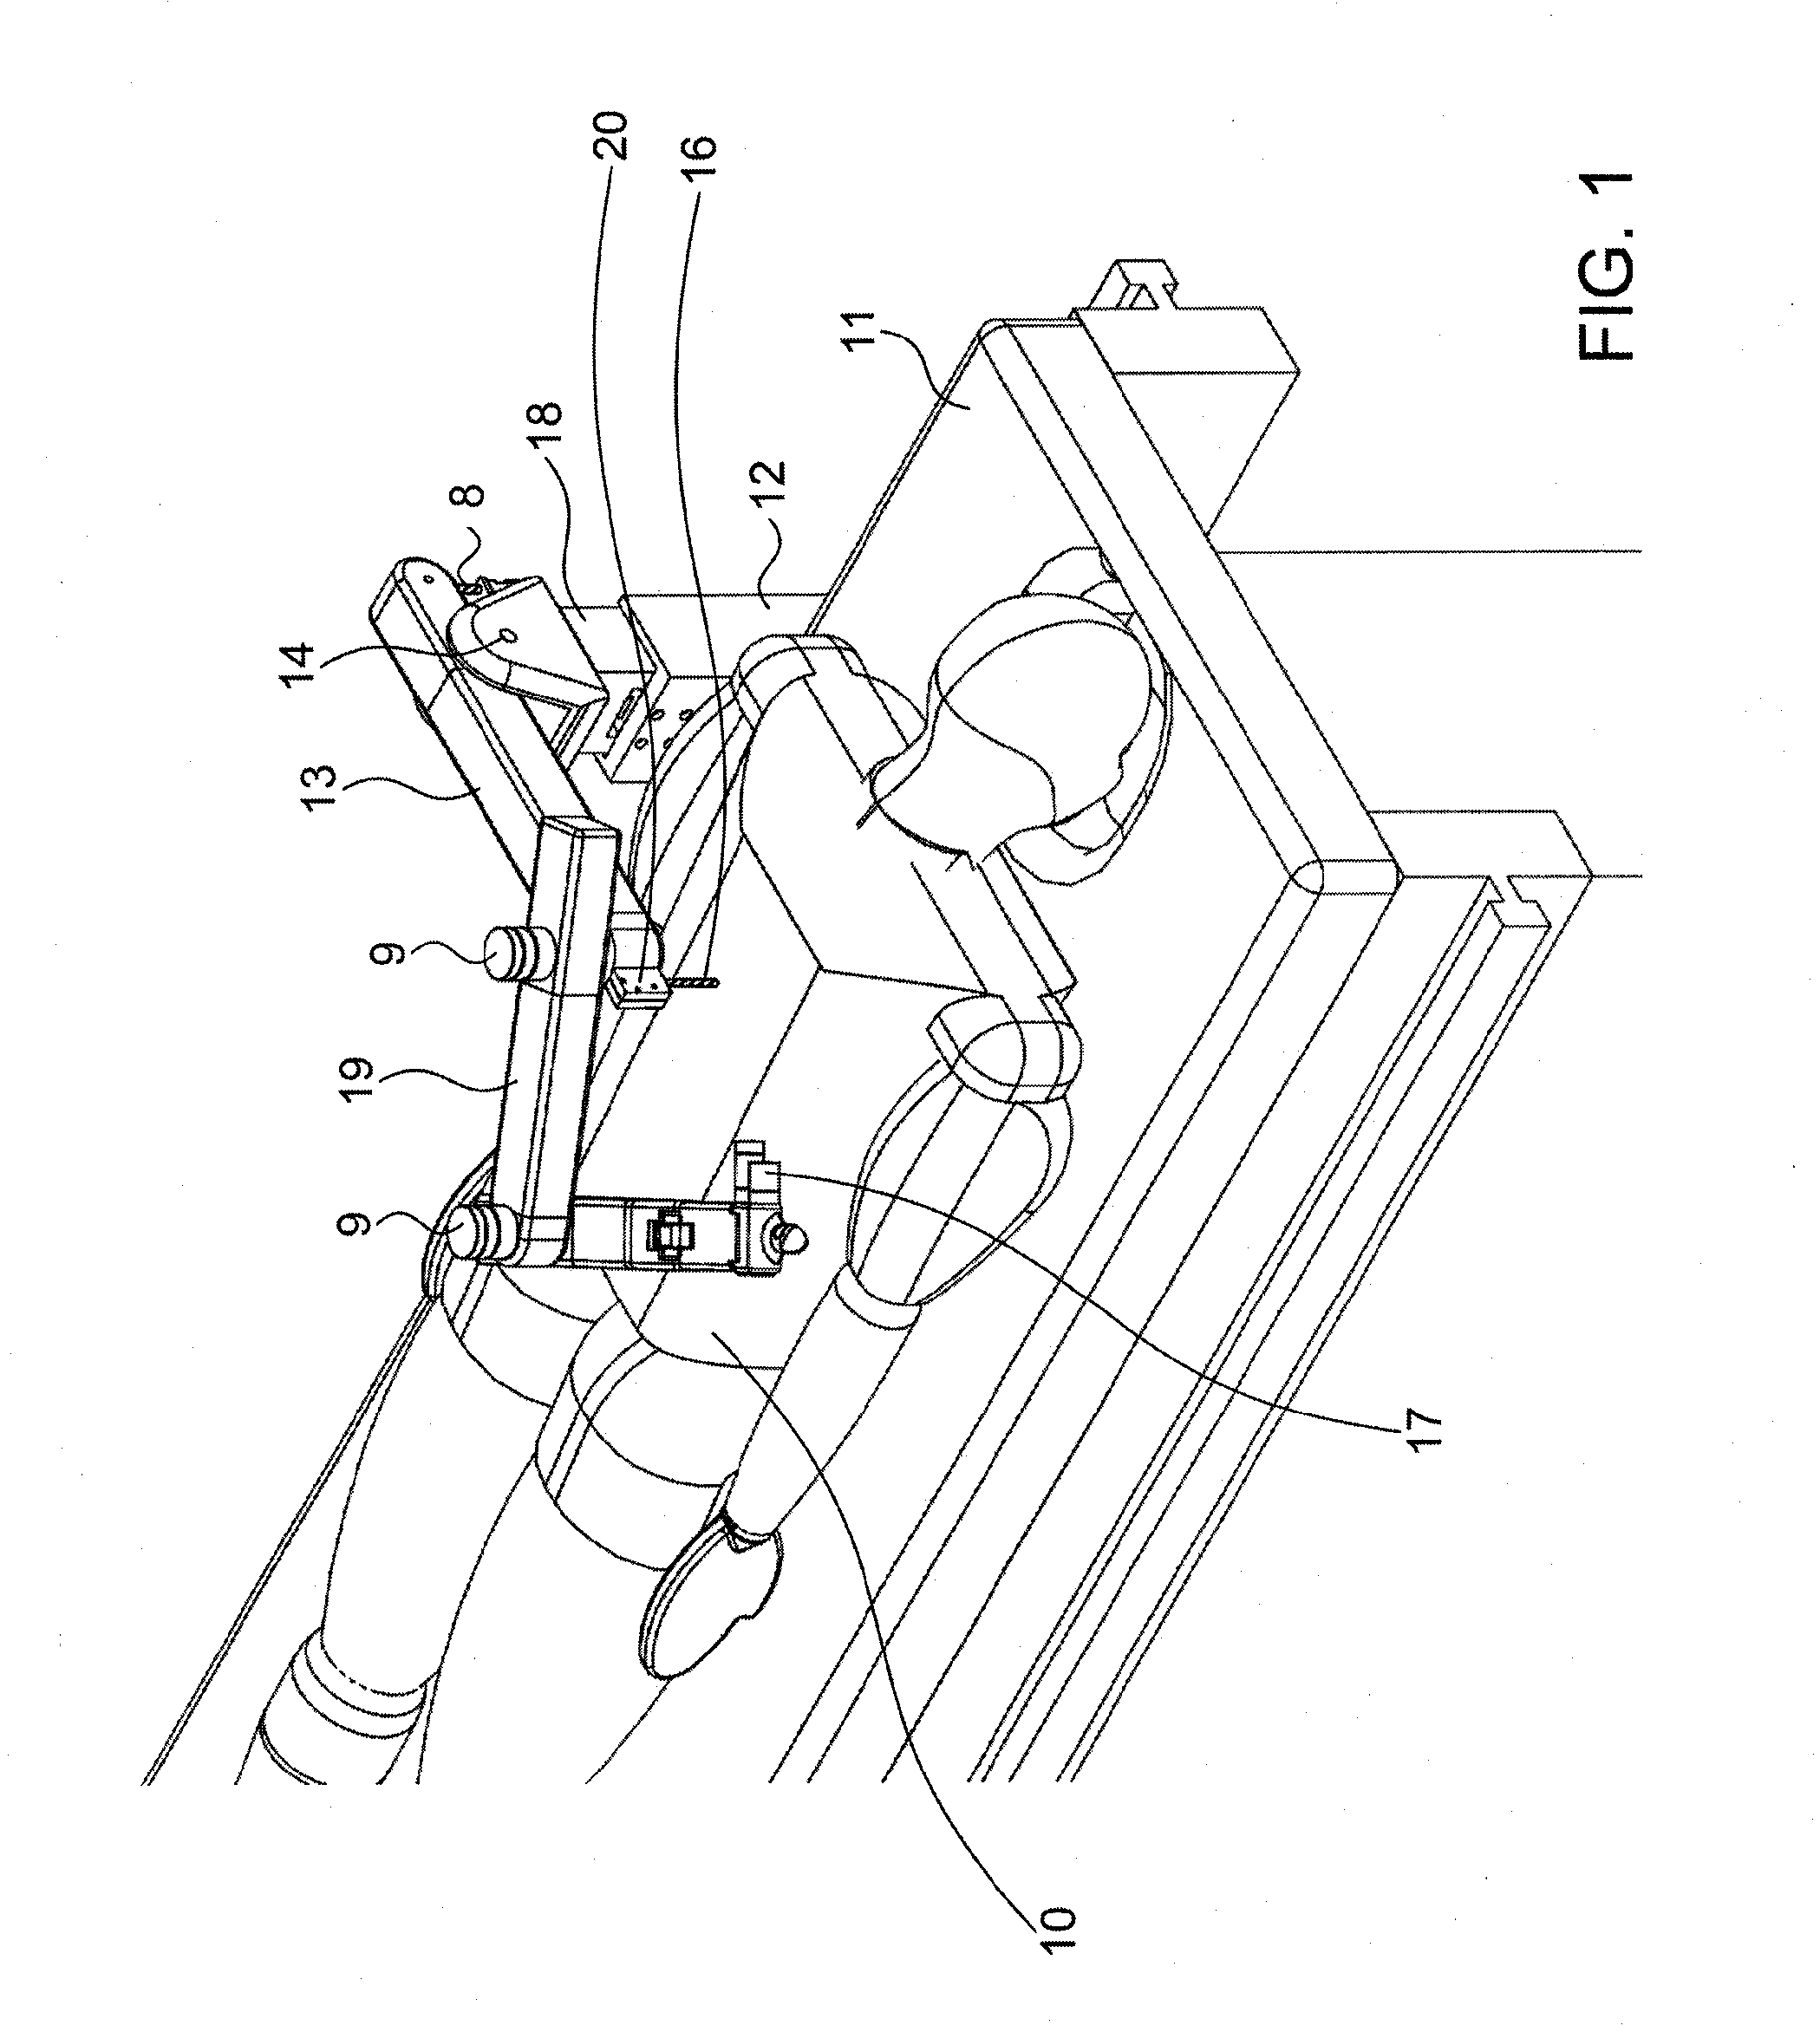 Active bed mount for surgical robot